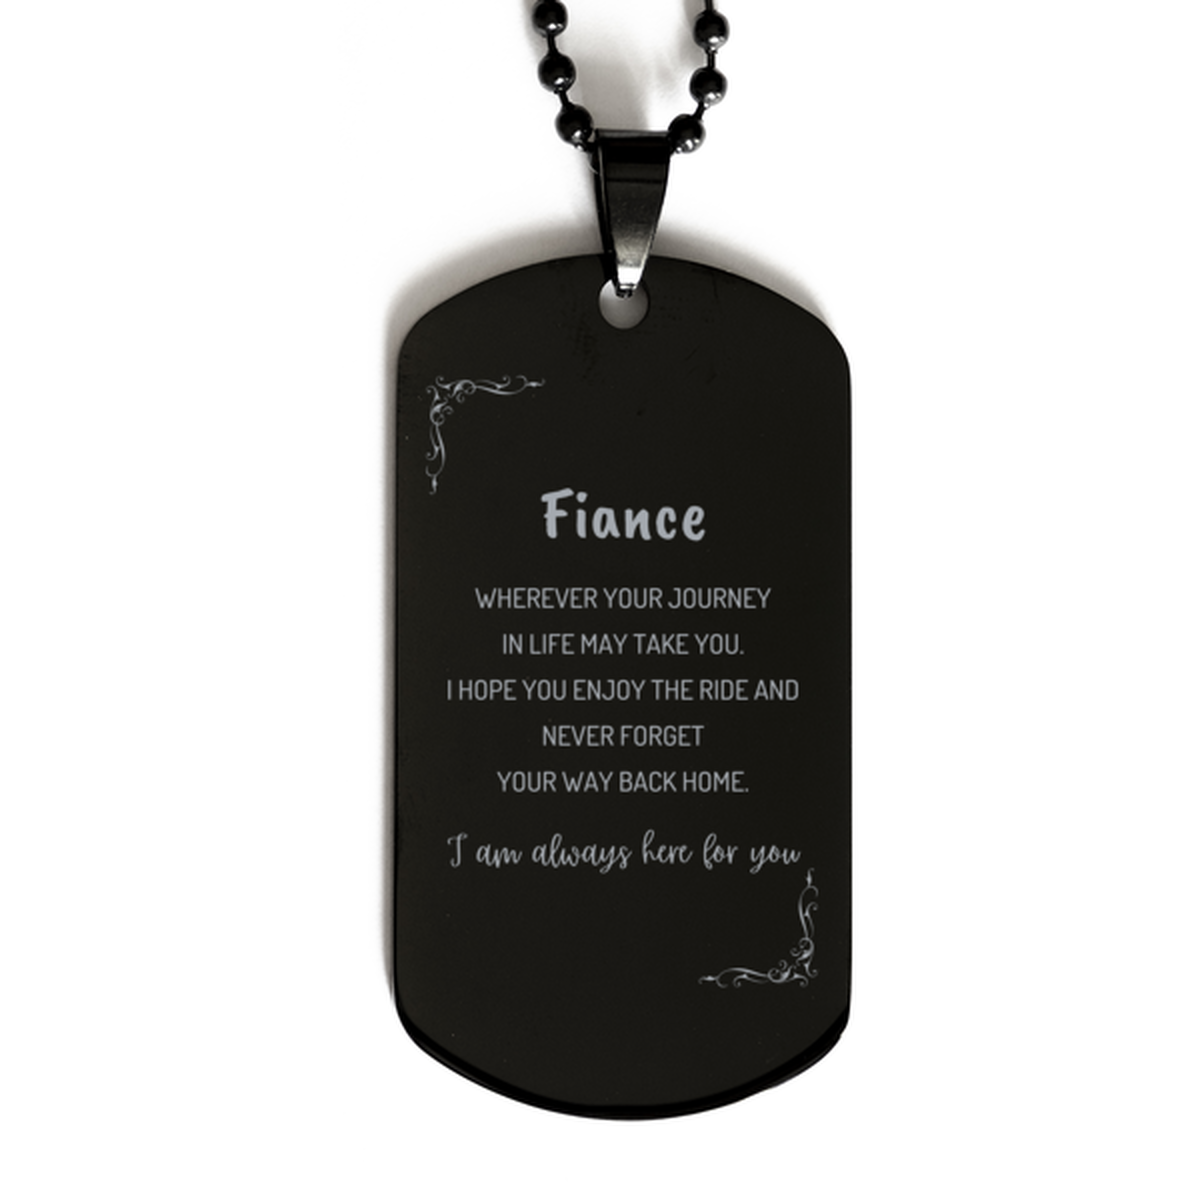 Fiance wherever your journey in life may take you, I am always here for you Fiance Black Dog Tag, Awesome Christmas Gifts For Fiance, Fiance Birthday Gifts for Men Women Family Loved One